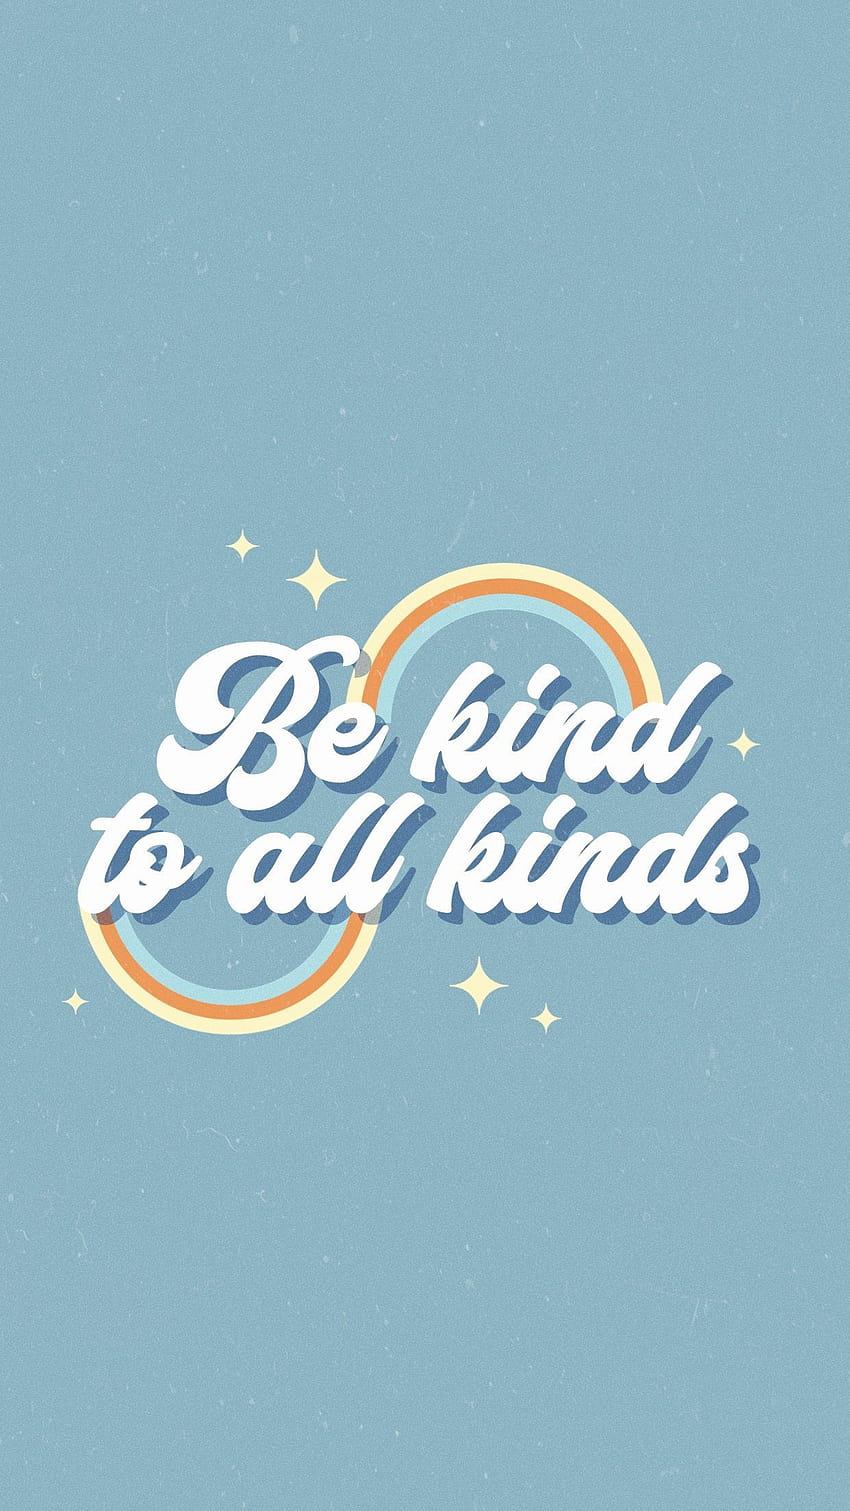 Be kind to all kinds, treasure quote HD phone wallpaper